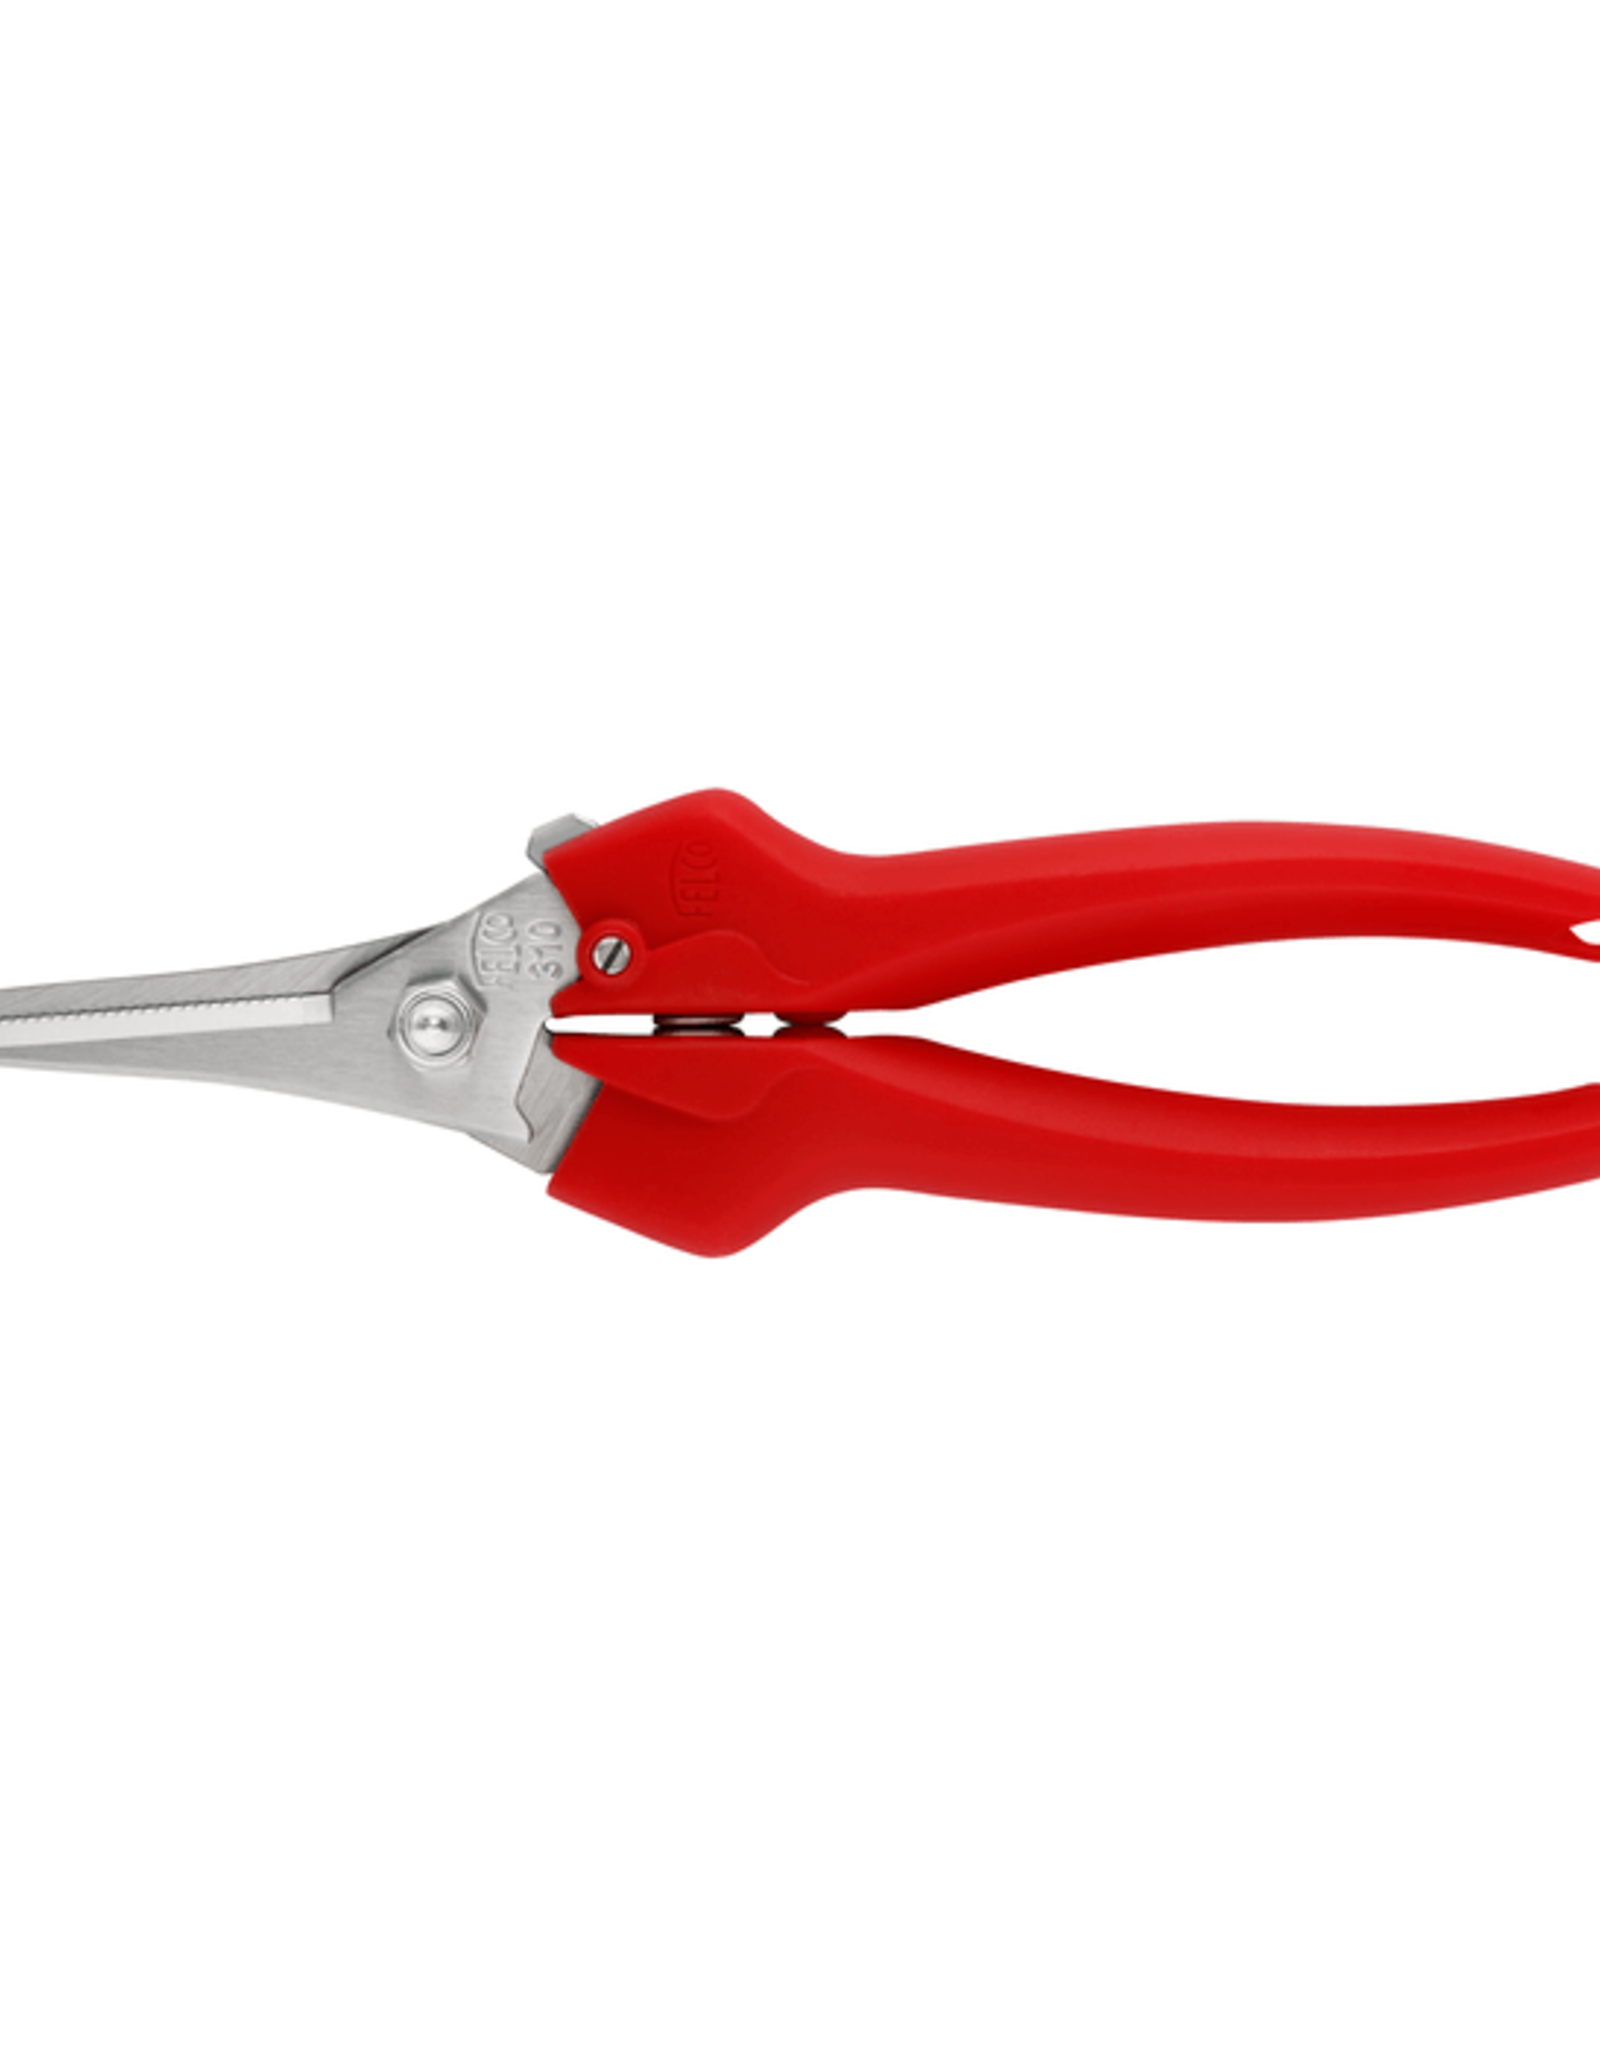 Pygar Sales Limited Felco 310 - Picking and Trimming Snip - For grape harvesting